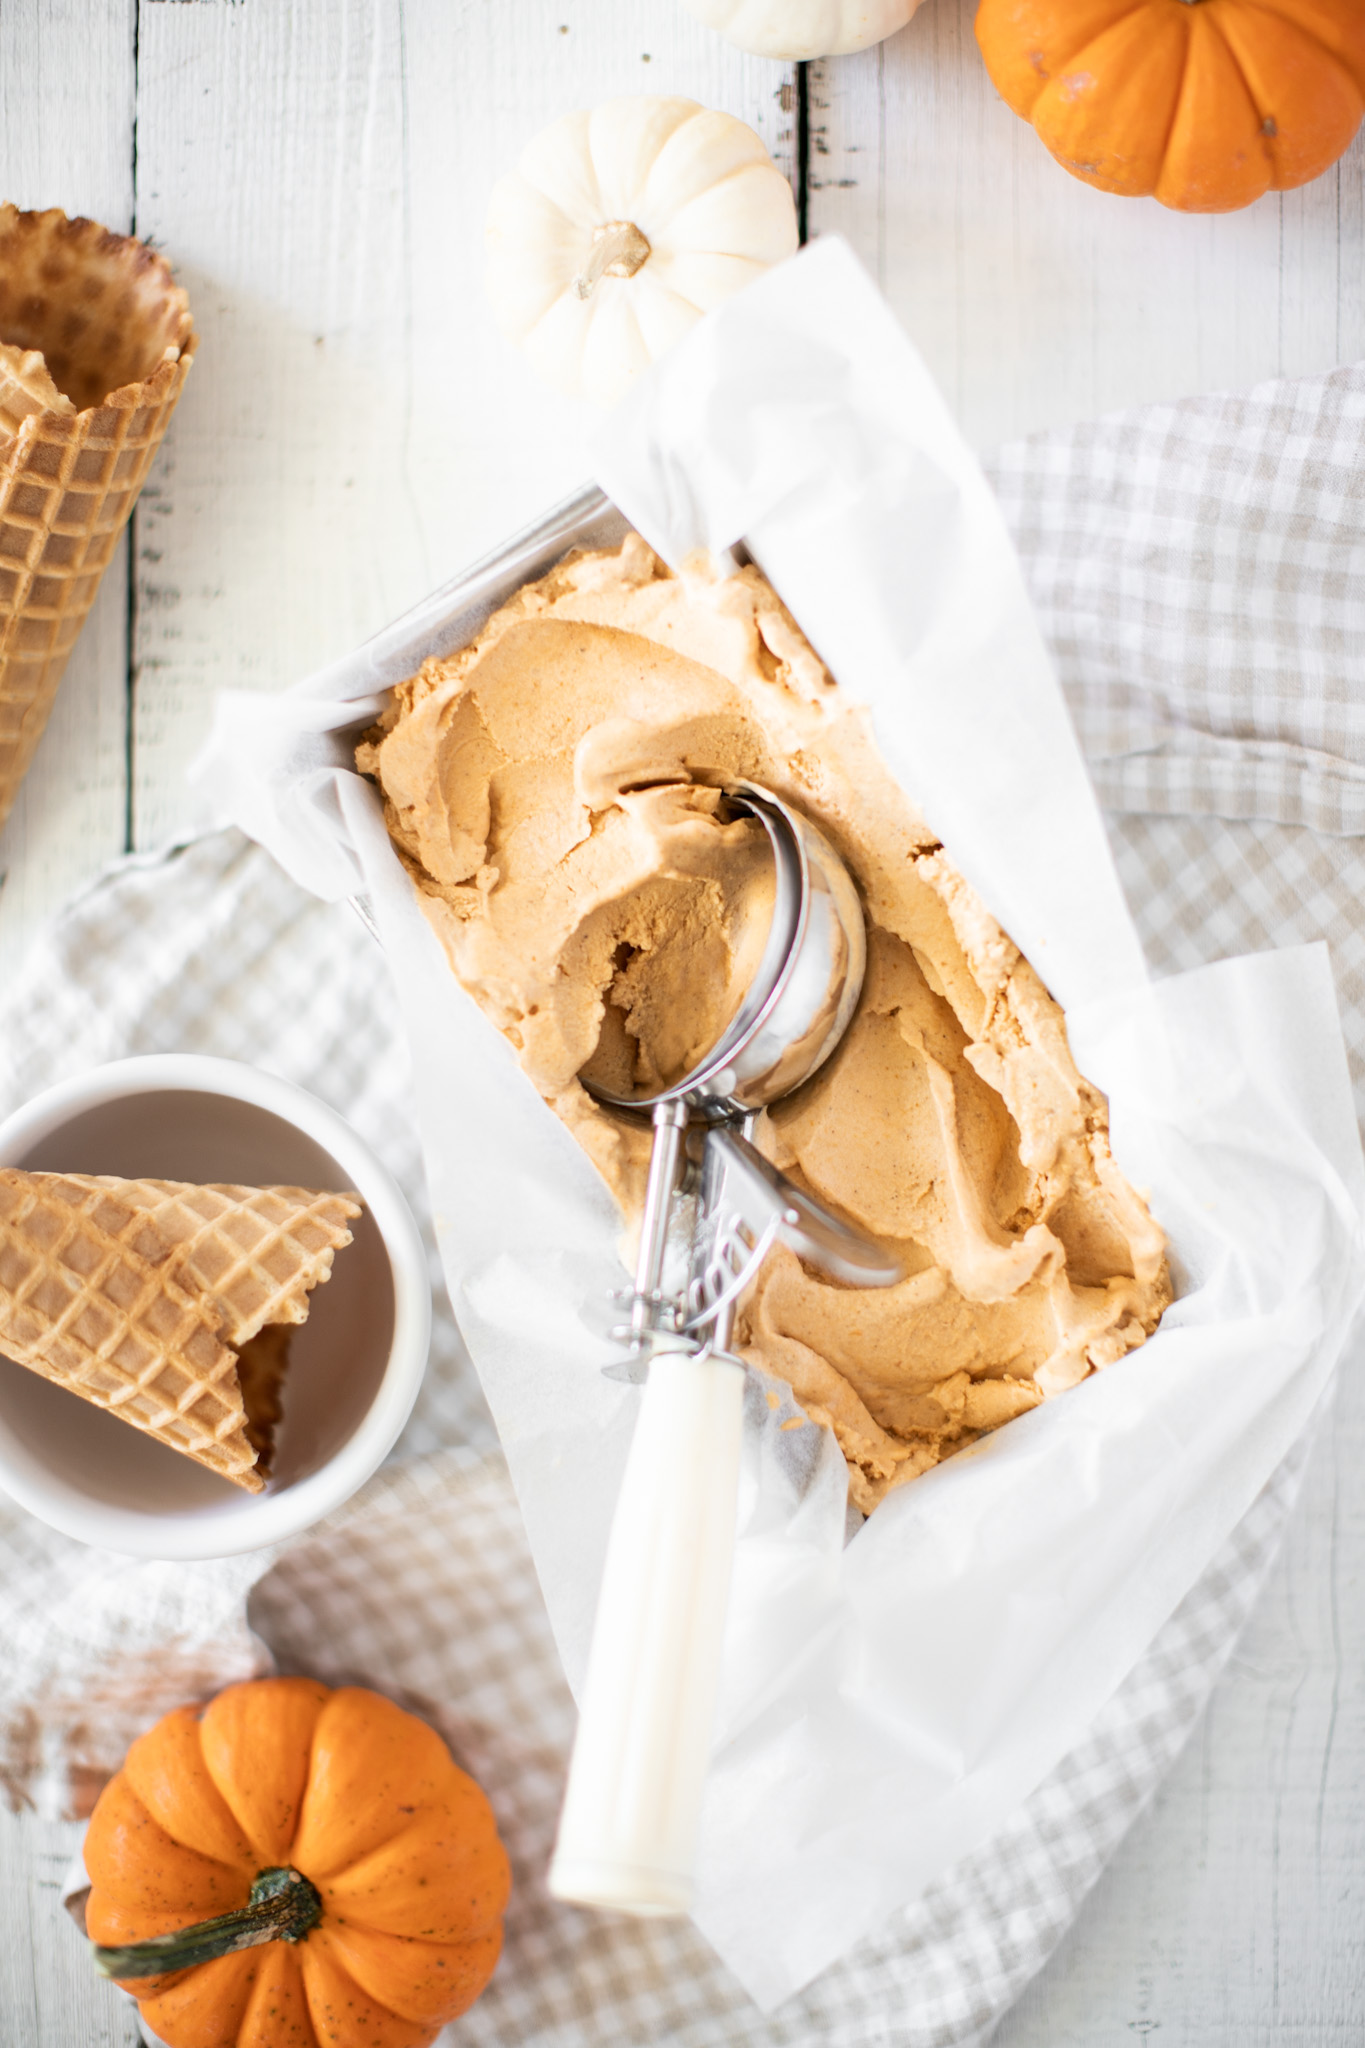 Pumpkin Pie Ice Cream with a scoop and waffle cones